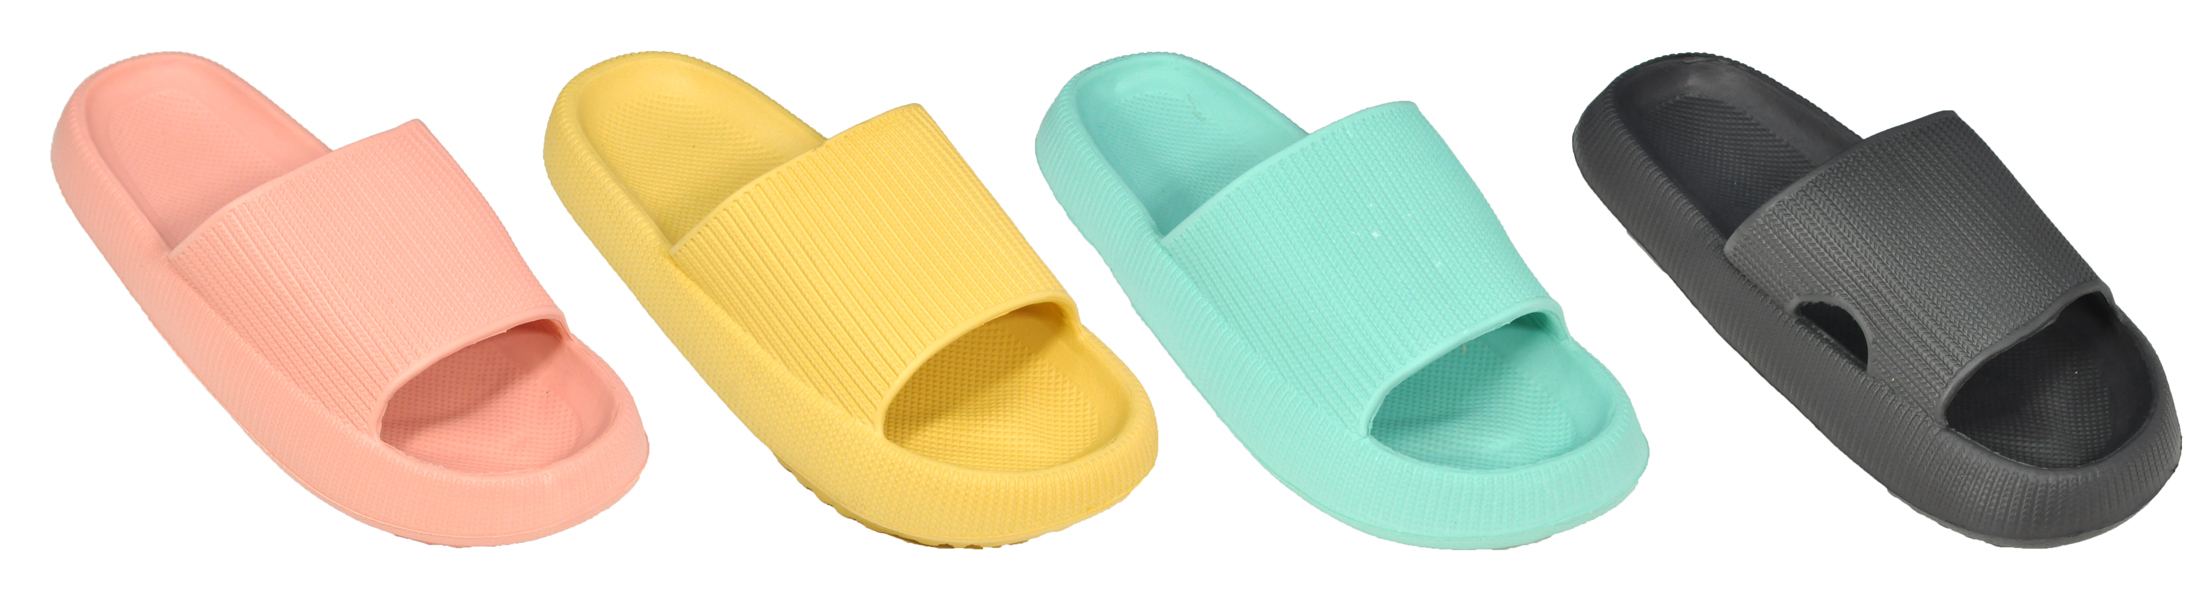 Women's Ribbed Barbados Slide SANDALS - Assorted Colors